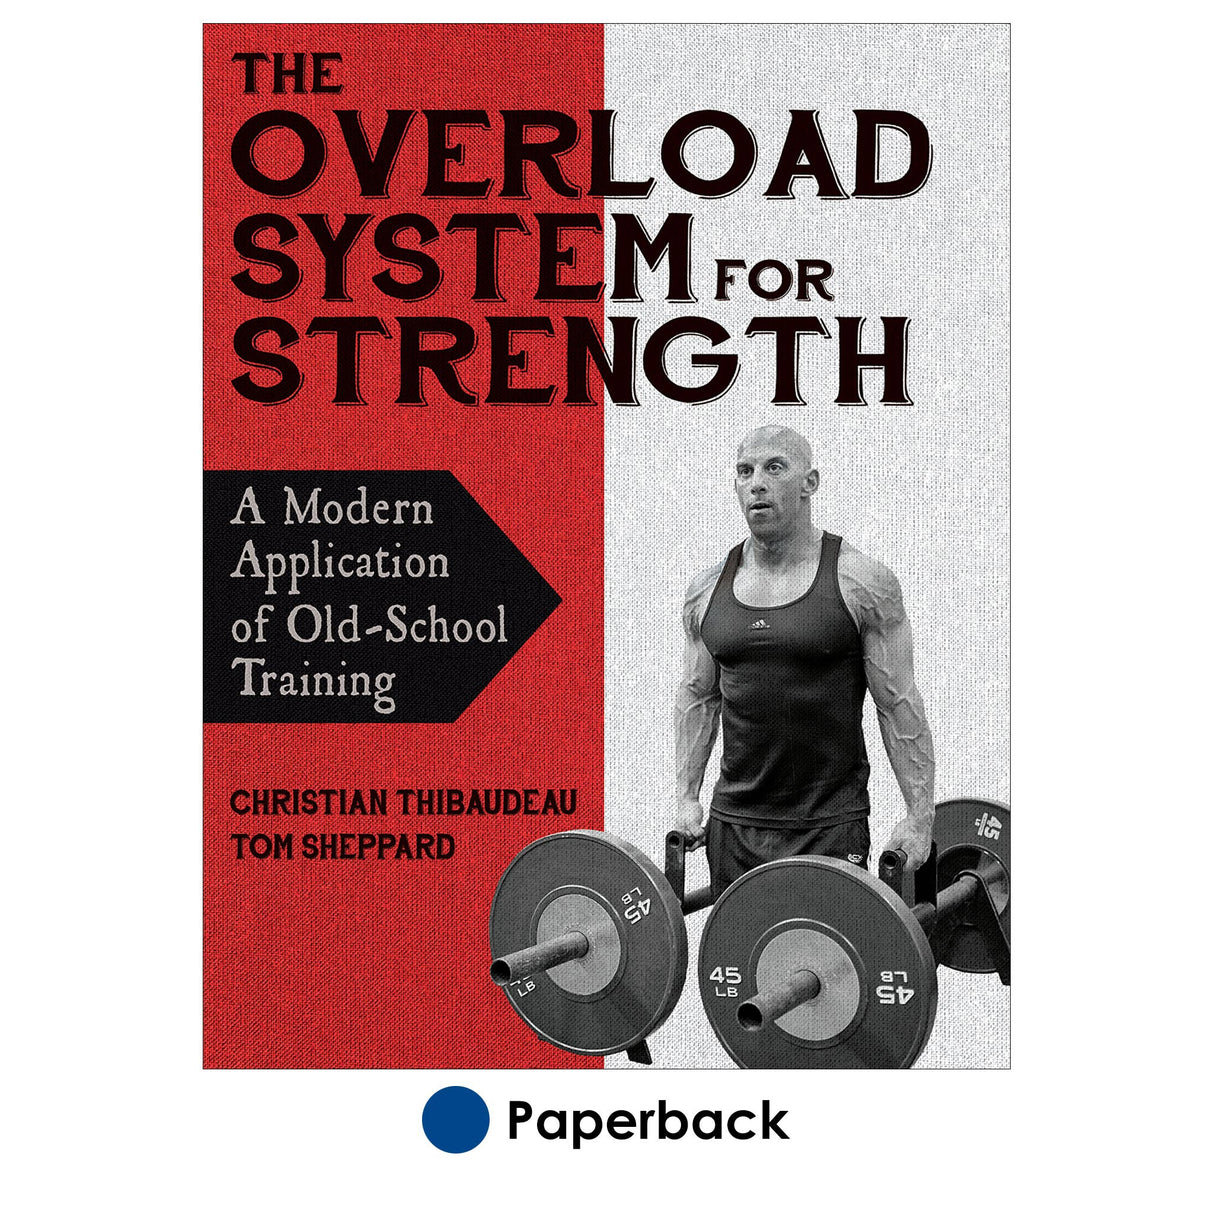 Overload System for Strength, The